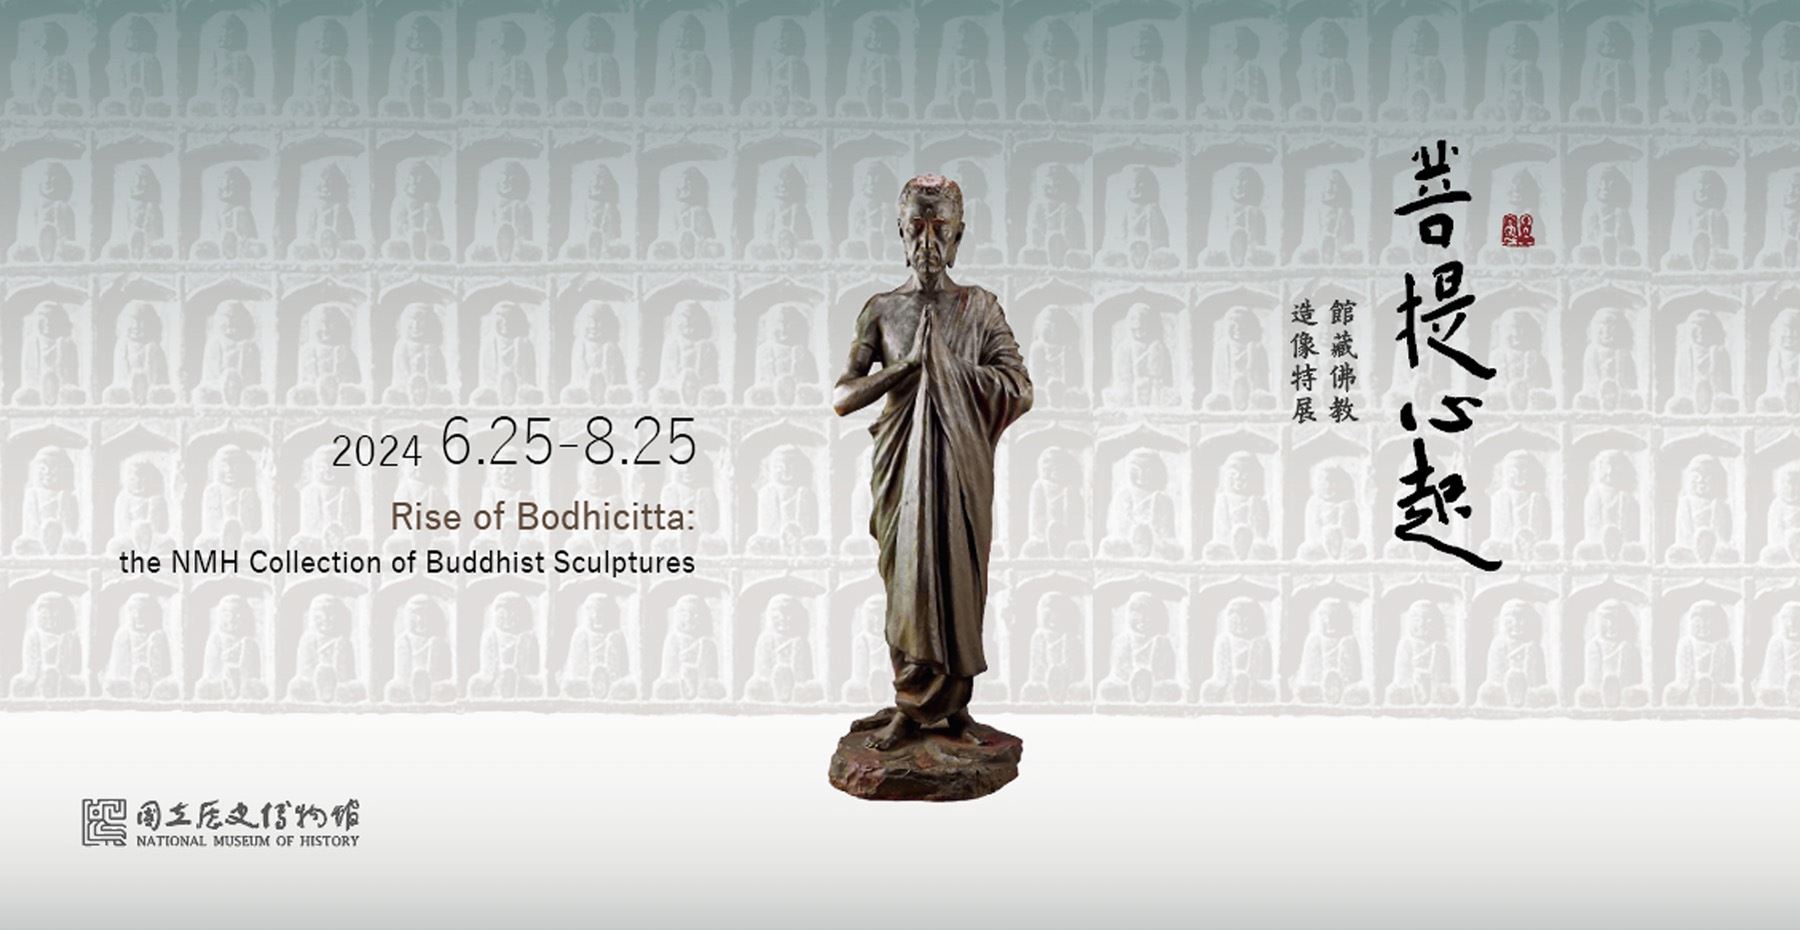 Rise of Bodhicitta: the NMH Collection of Buddhist Sculptures